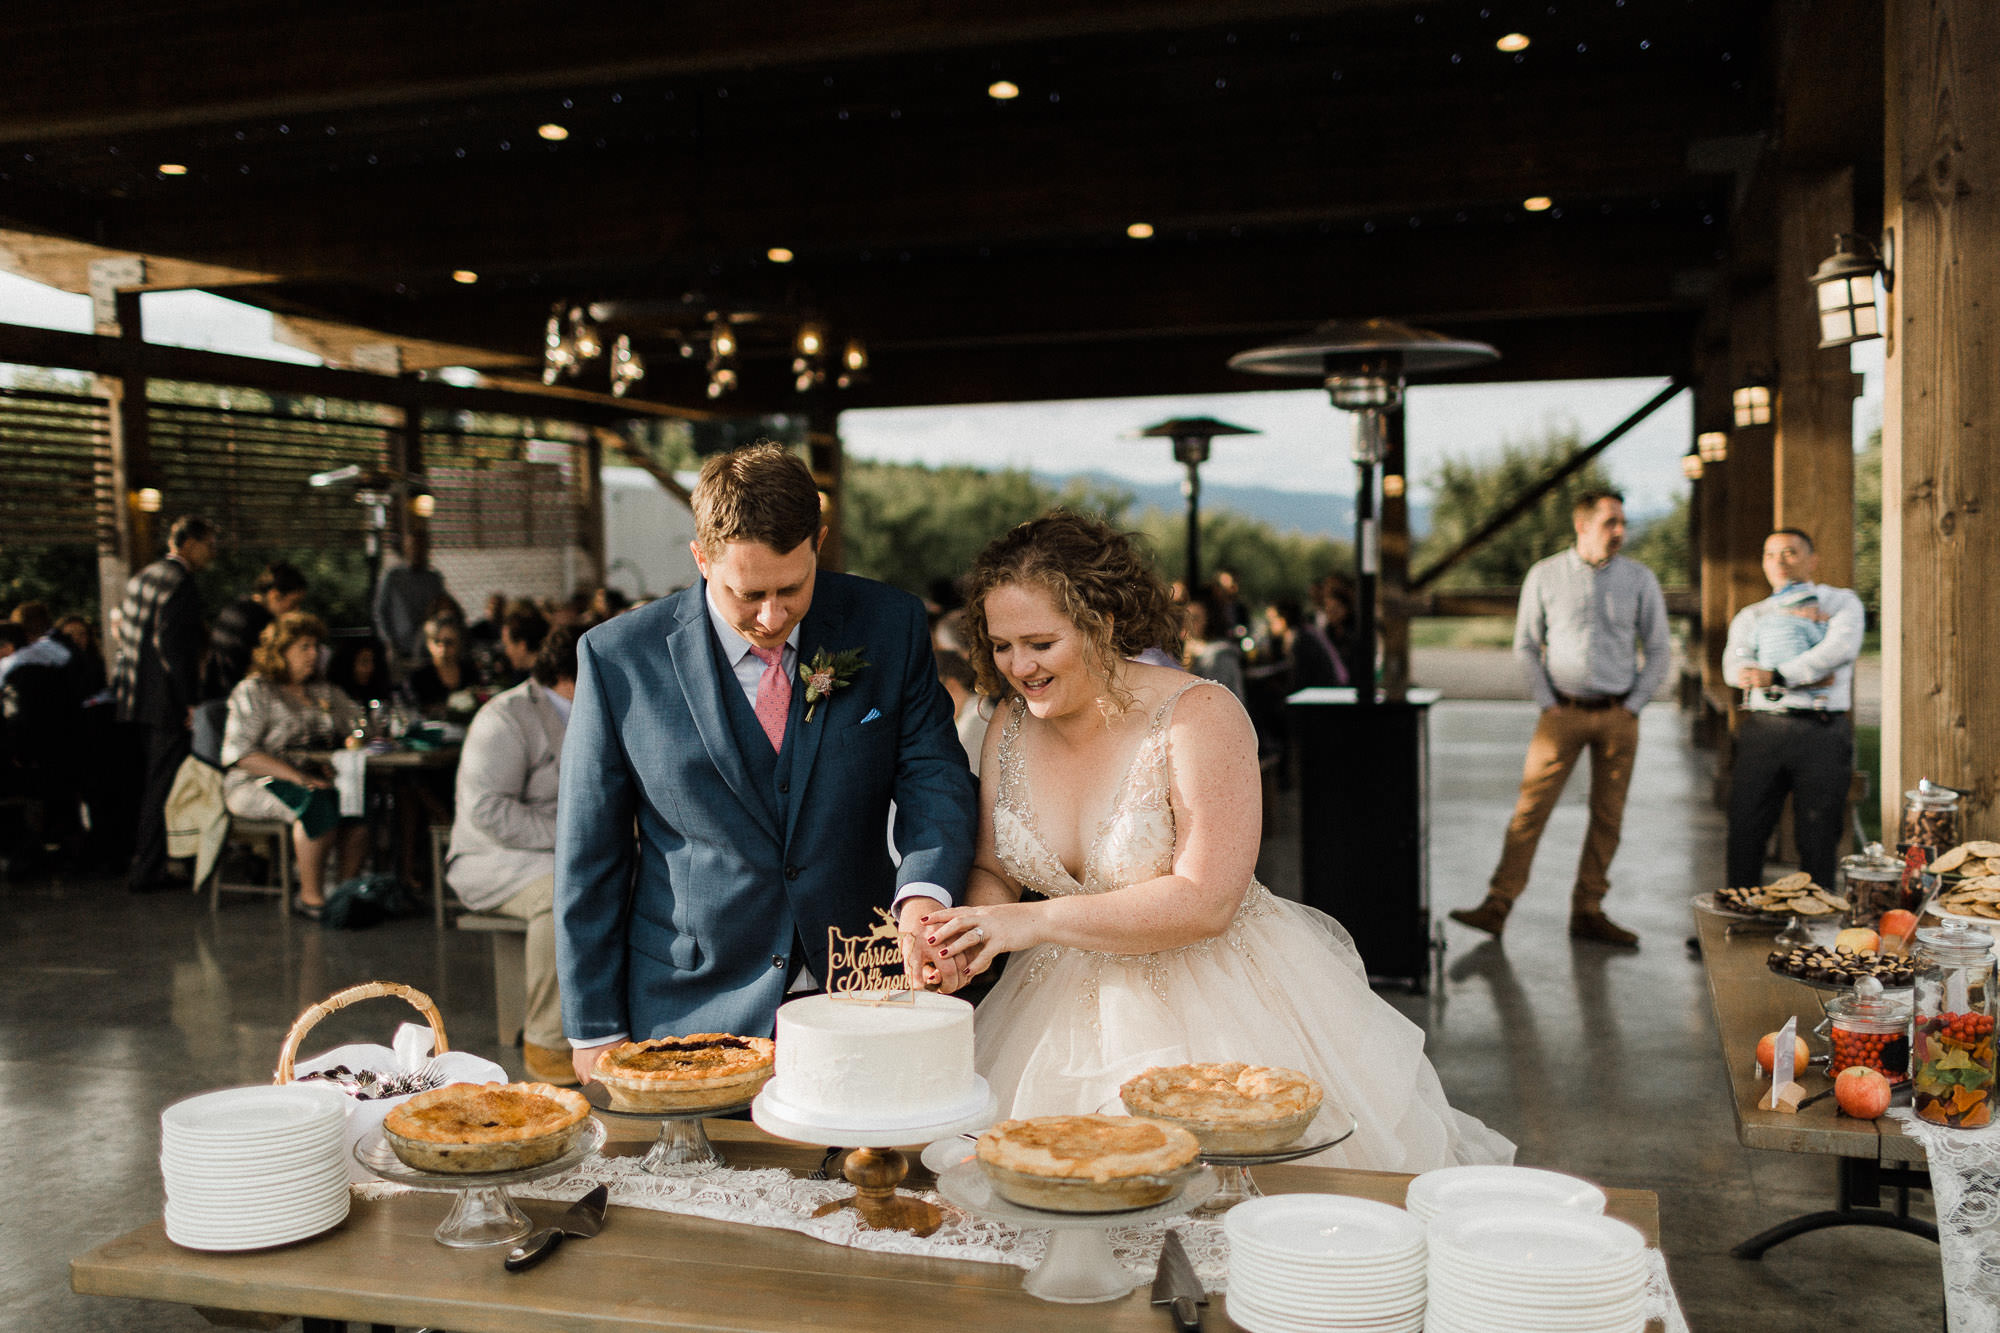 The bride and groom cut their cake at Mt. View Orchards in Mt Hood, Oregon.